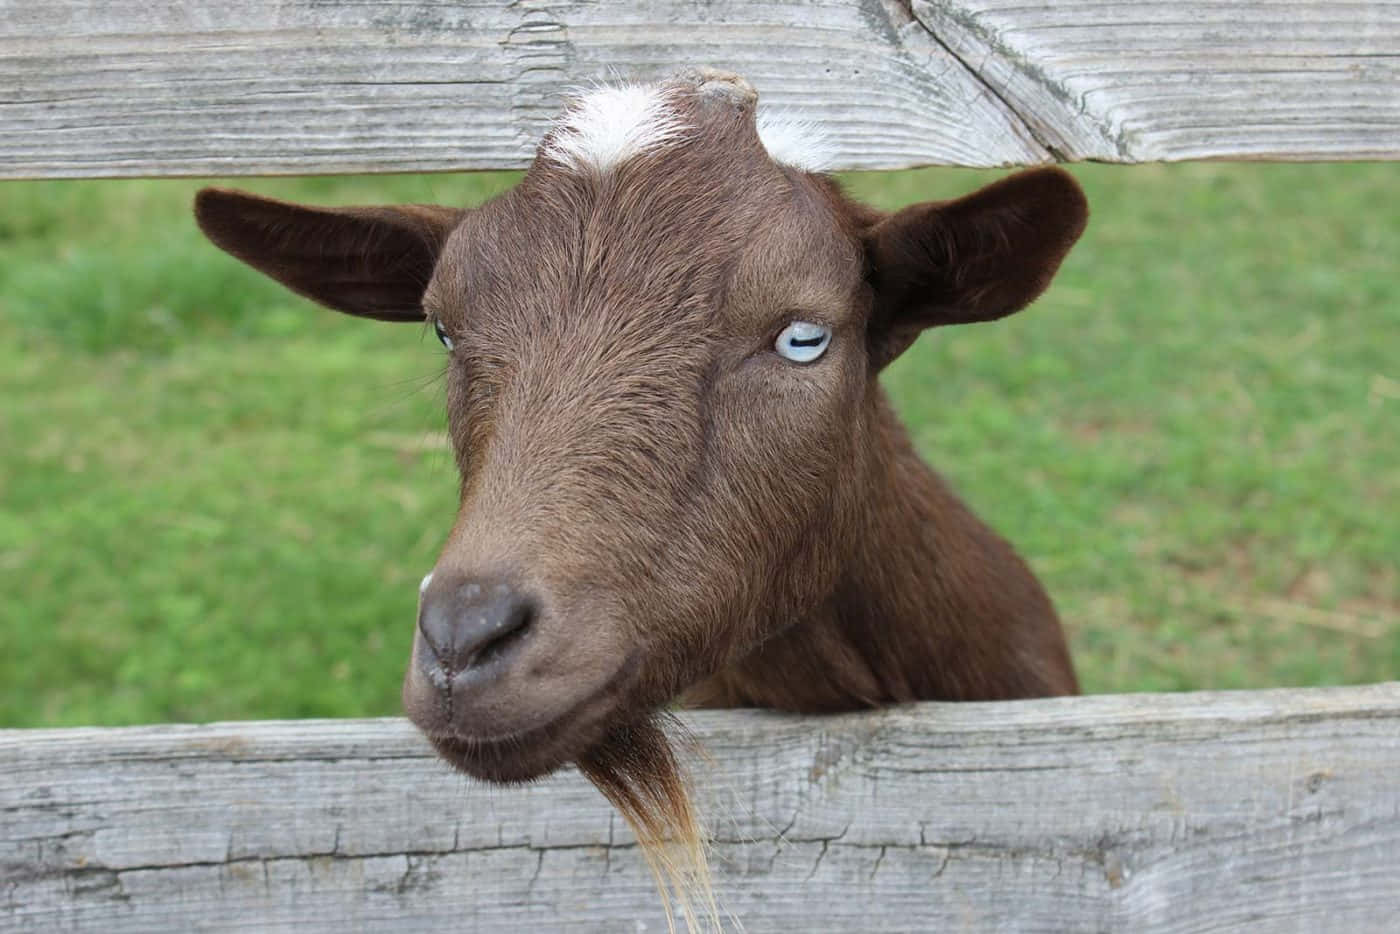 An inquisitive goat looks off into the distance